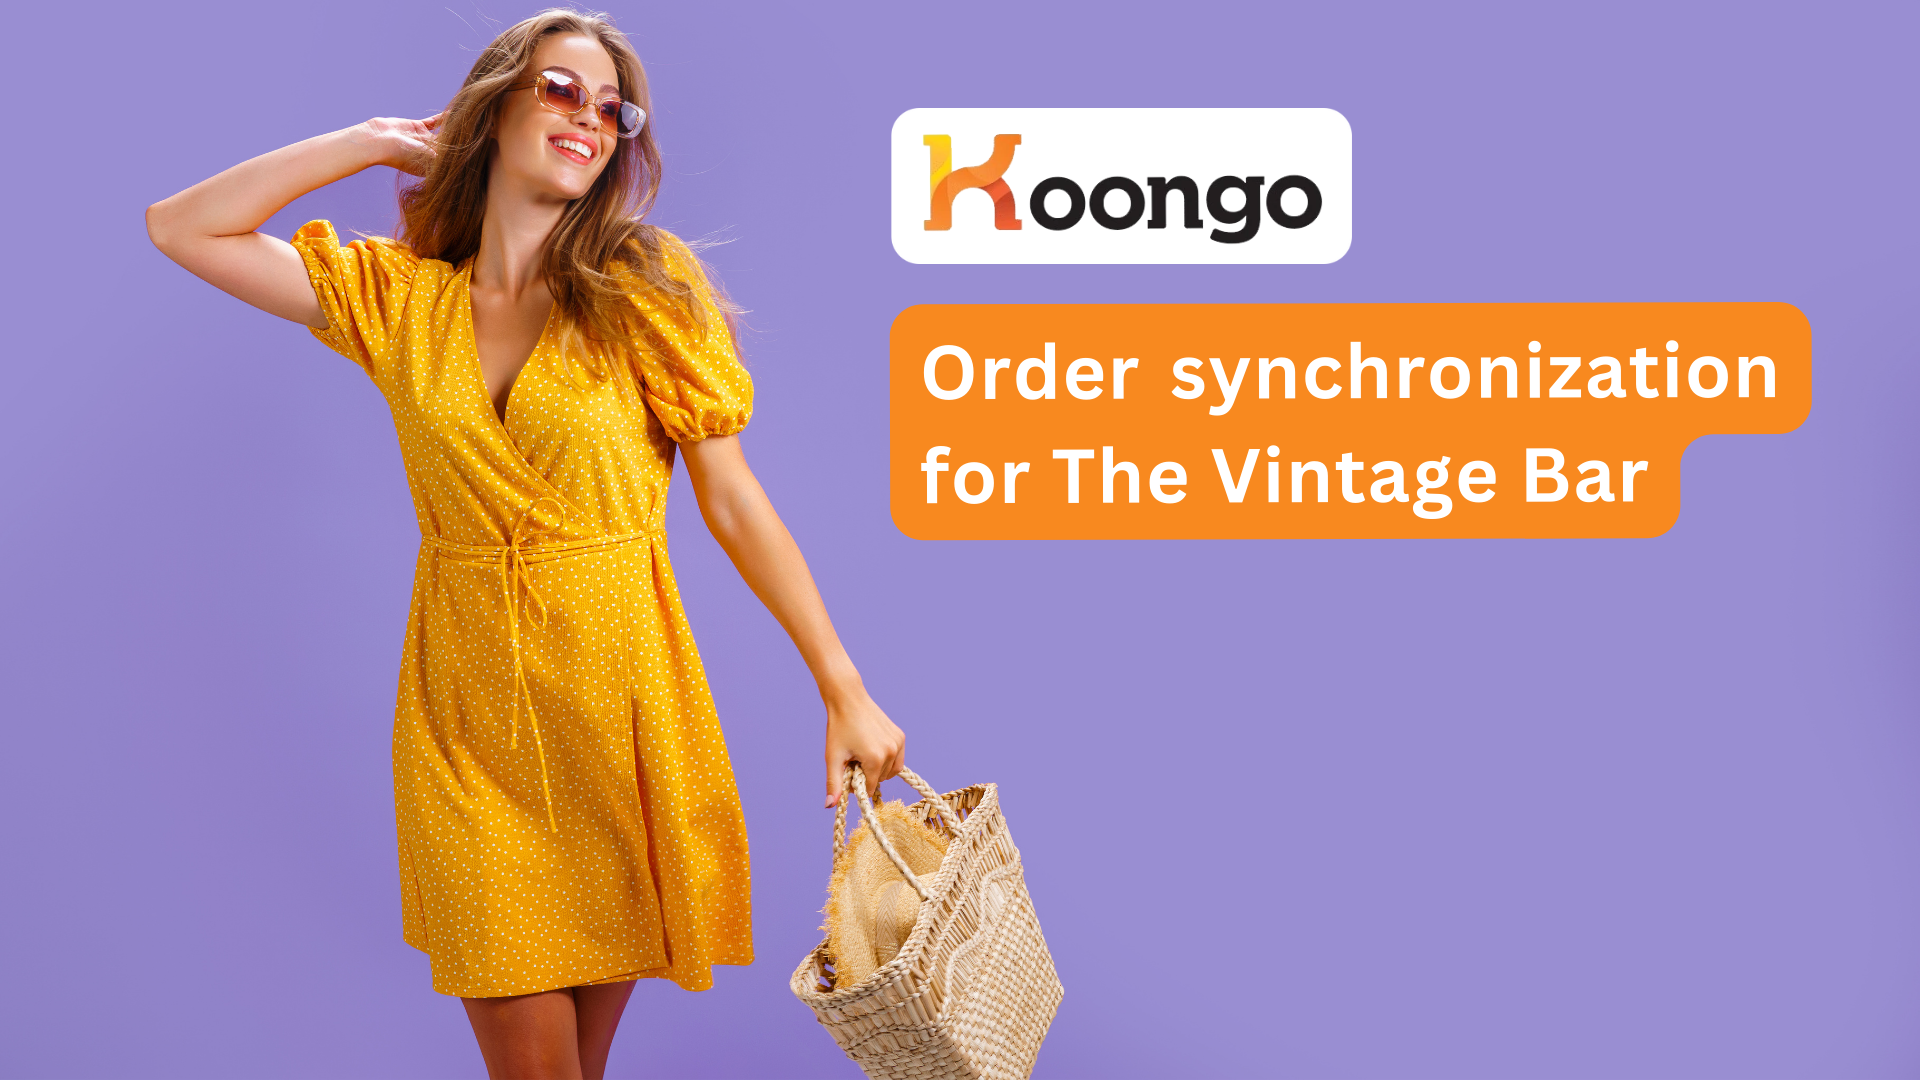 Introducing order synchronization for The Vintage Bar marketplace